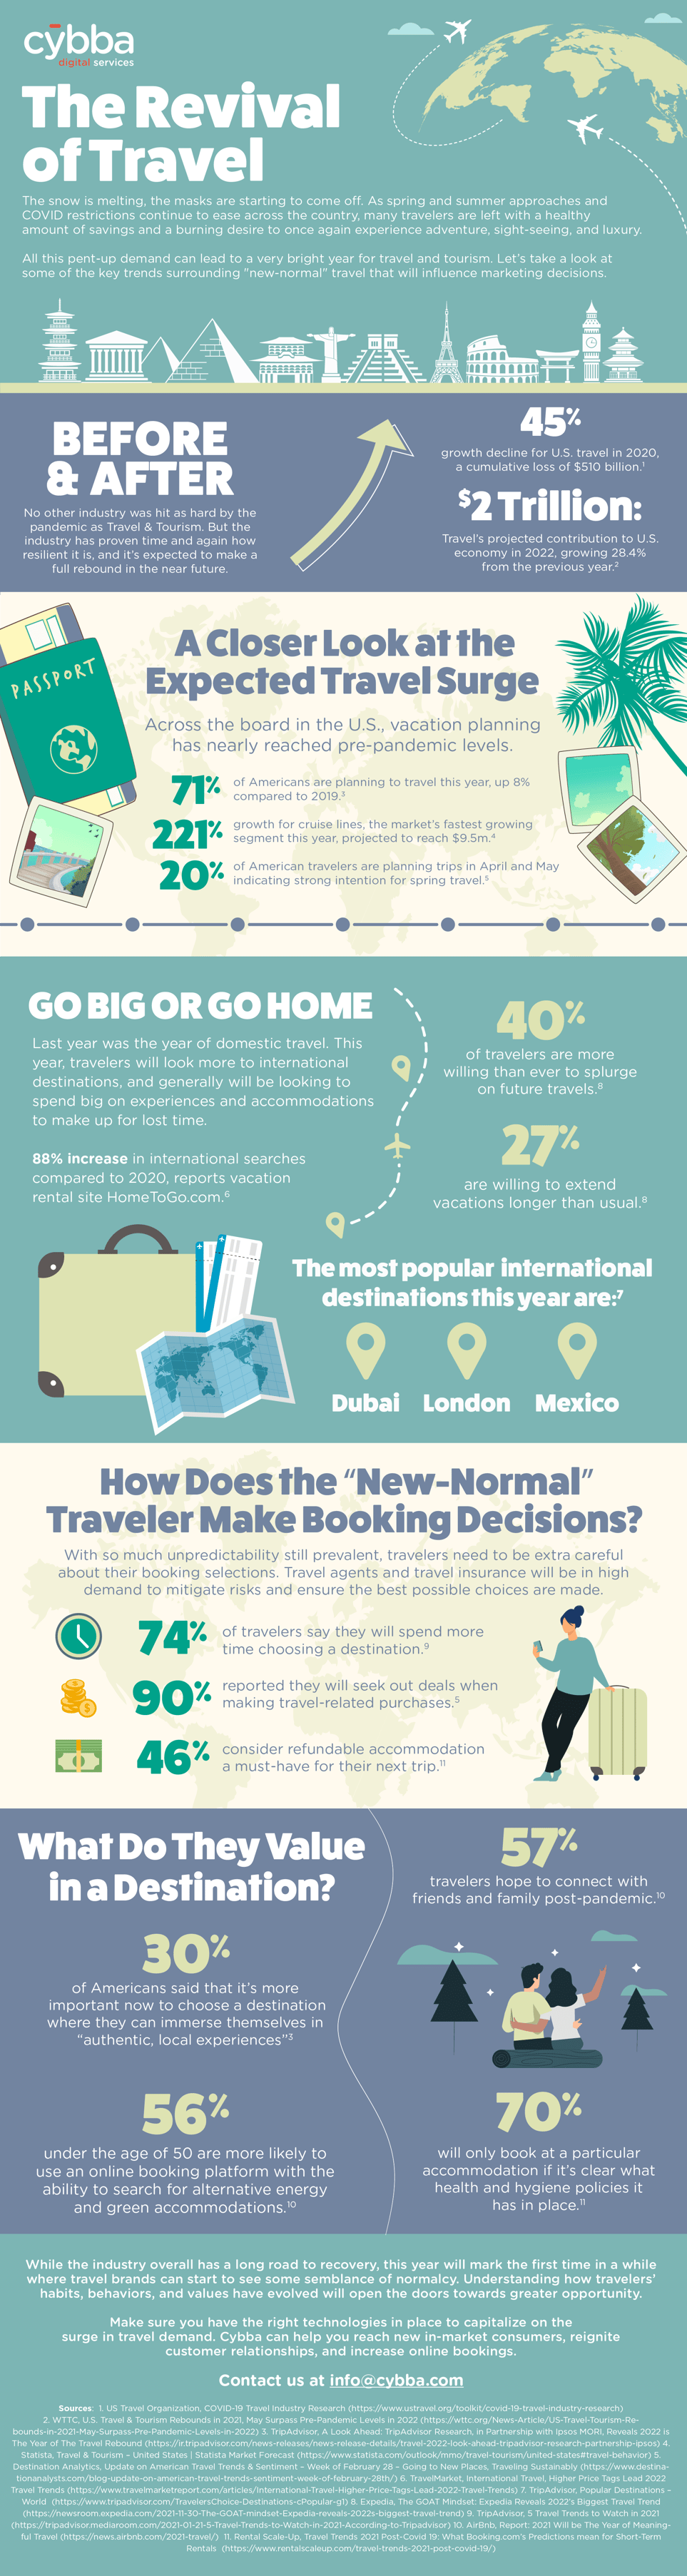 [Infographic] The Revival of Travel